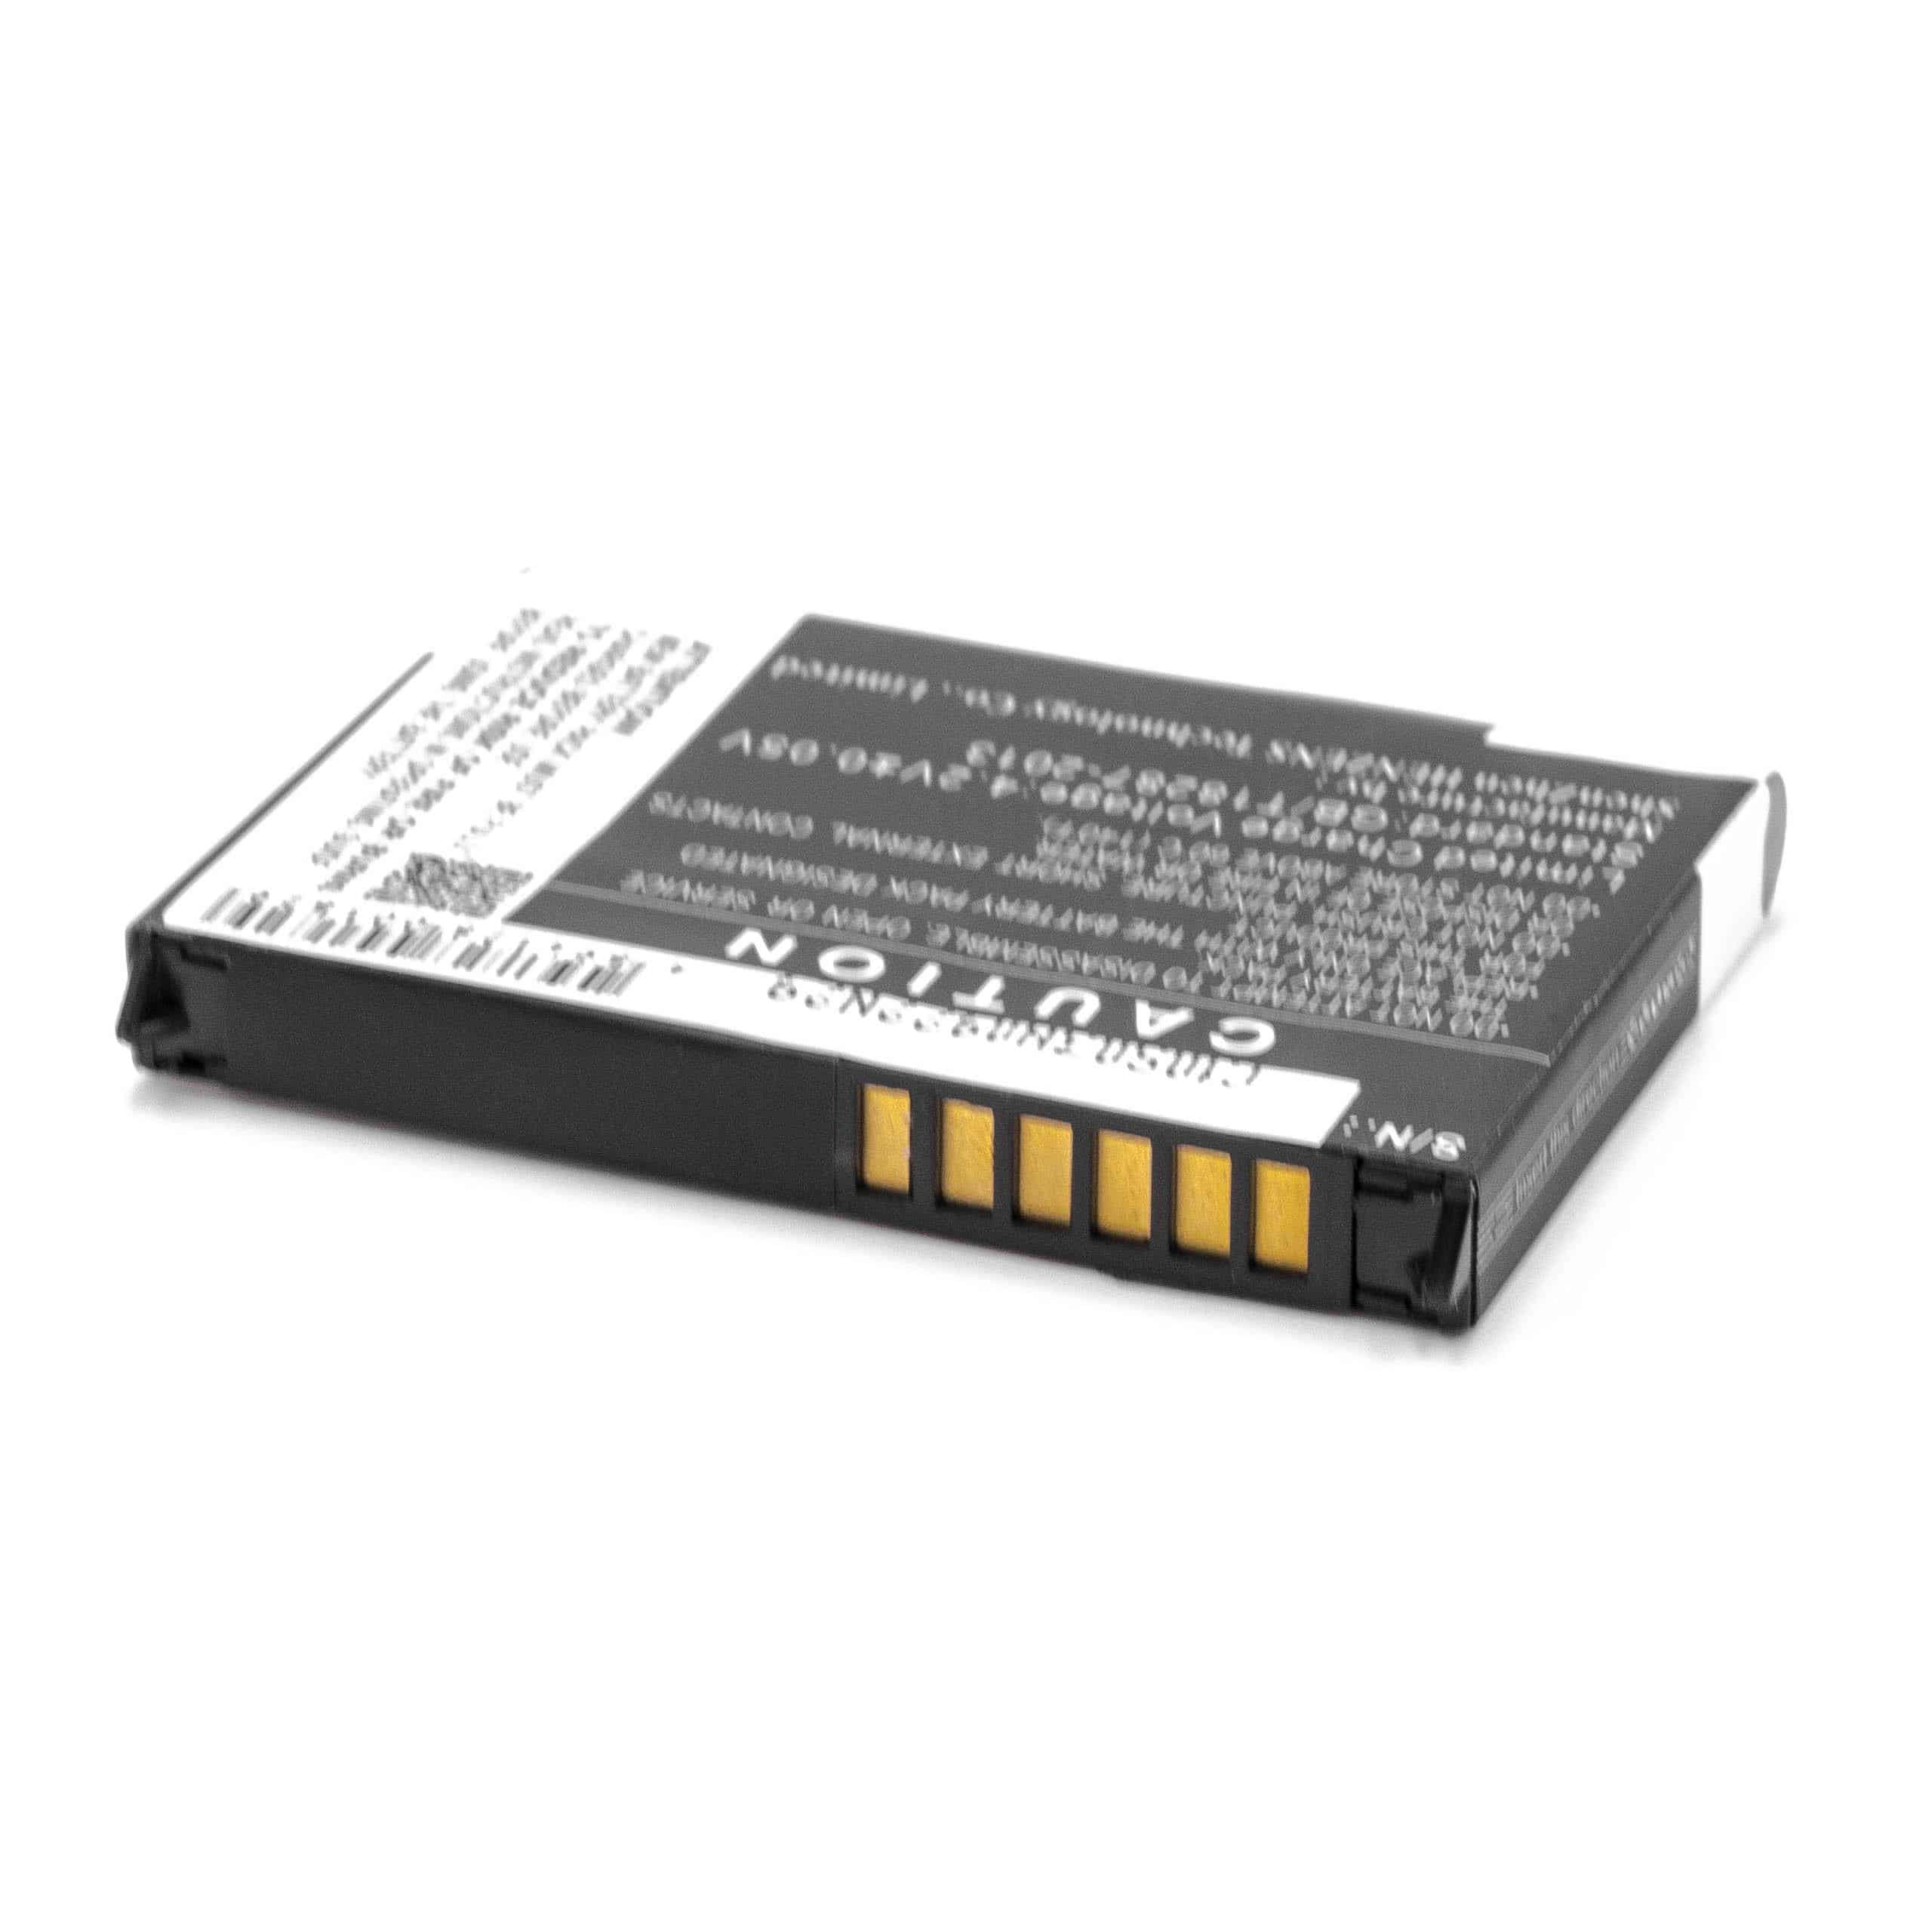 Mobile Computer Battery Replacement for PL400MD, PL500MB, PZX65, 10600405394, PL400MB - 1250mAh, 3.7V